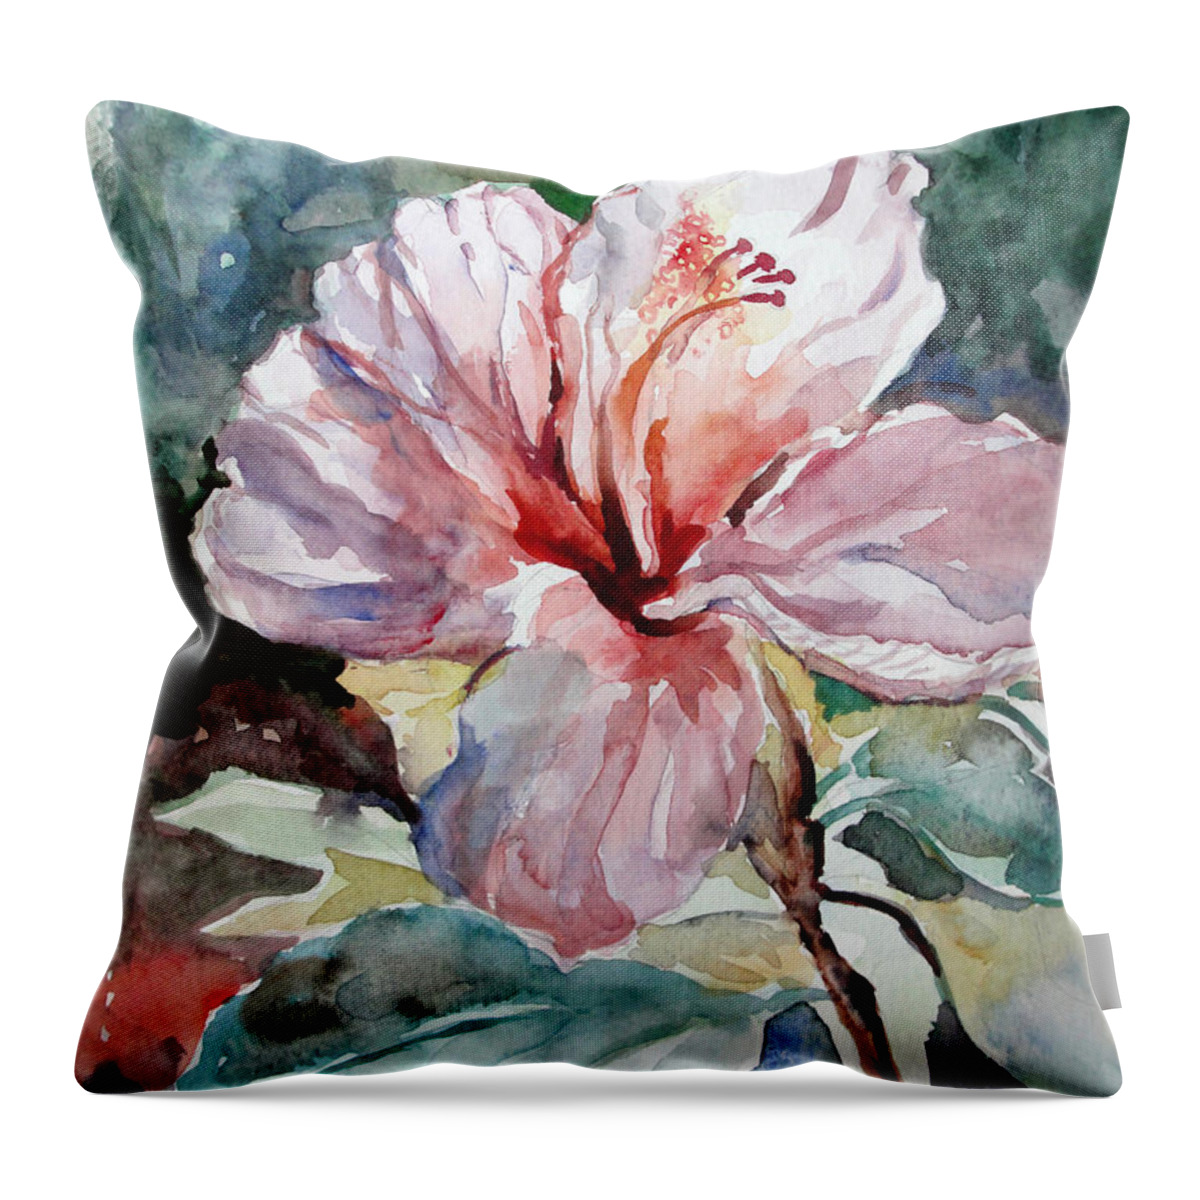 Flowers Throw Pillow featuring the painting Accented Hibiscus by Mafalda Cento